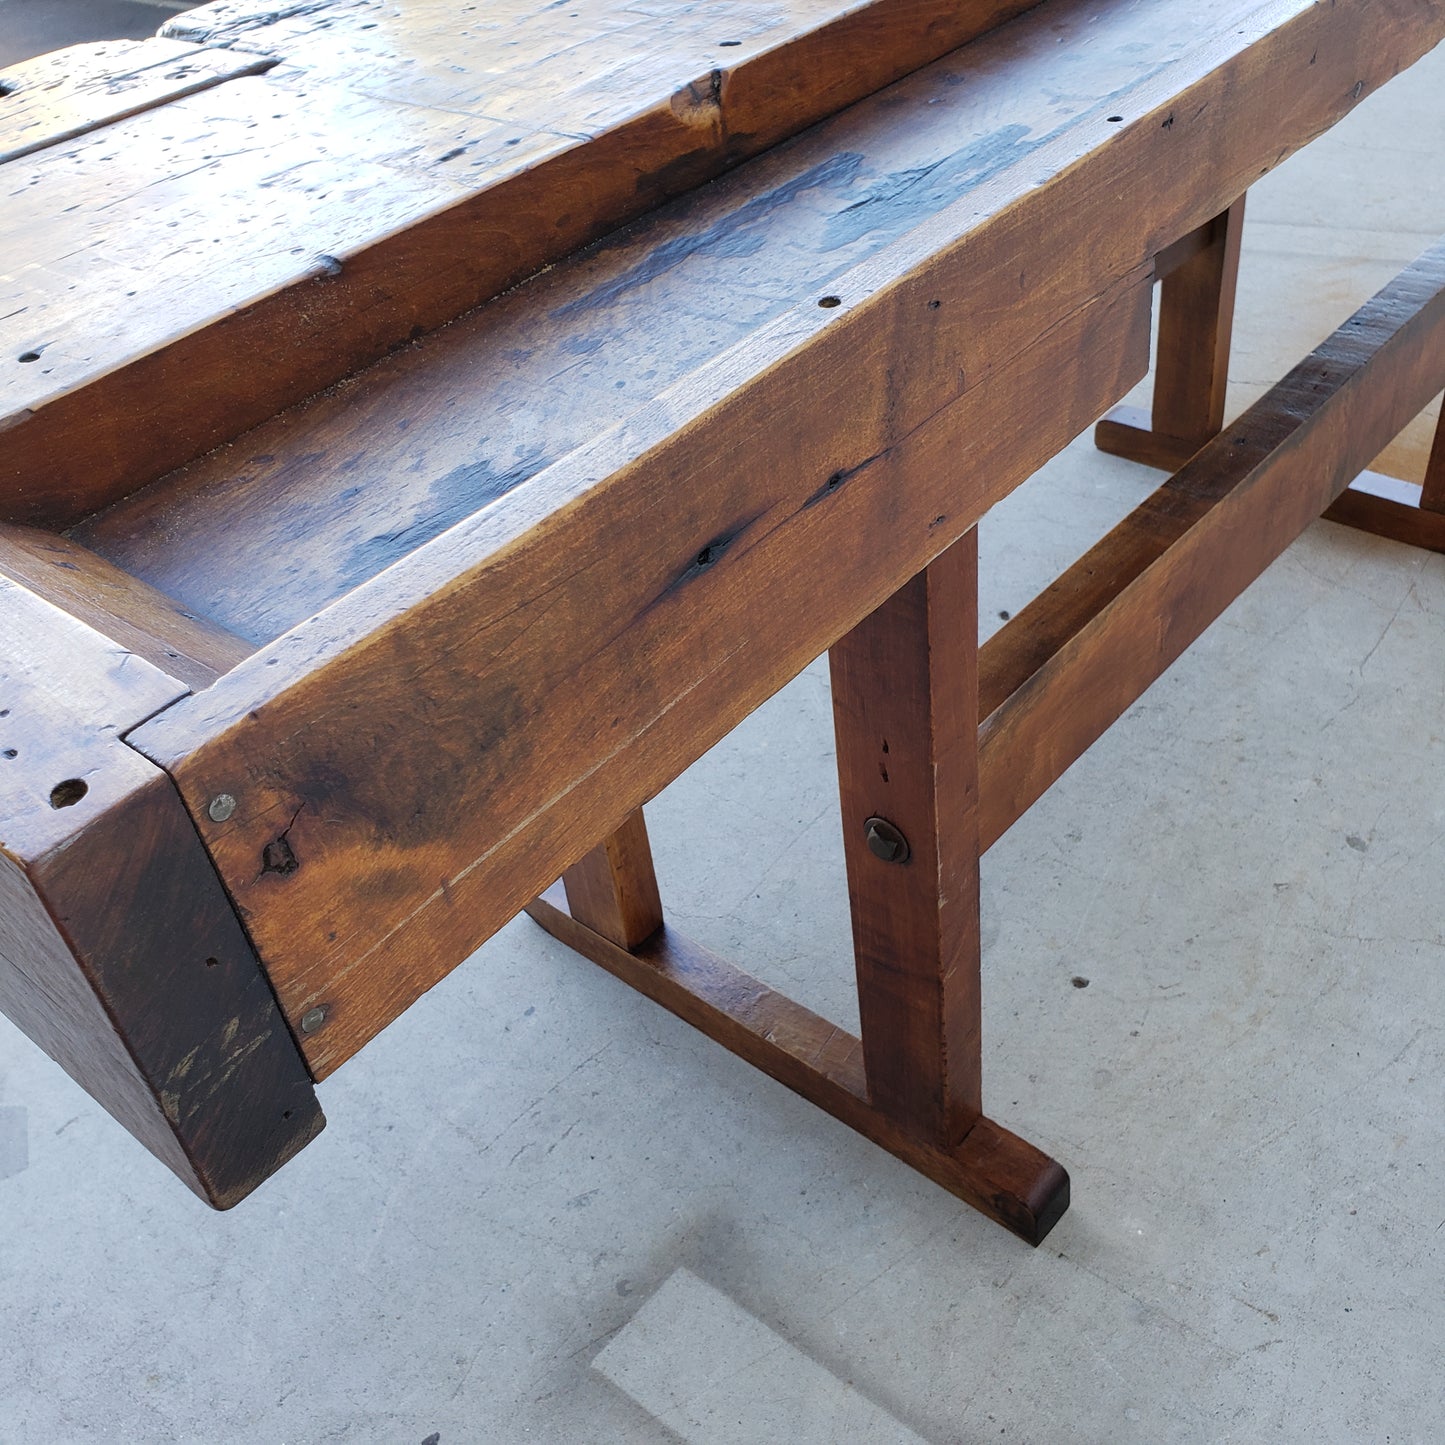 Stained Wooden Work Table with Vice